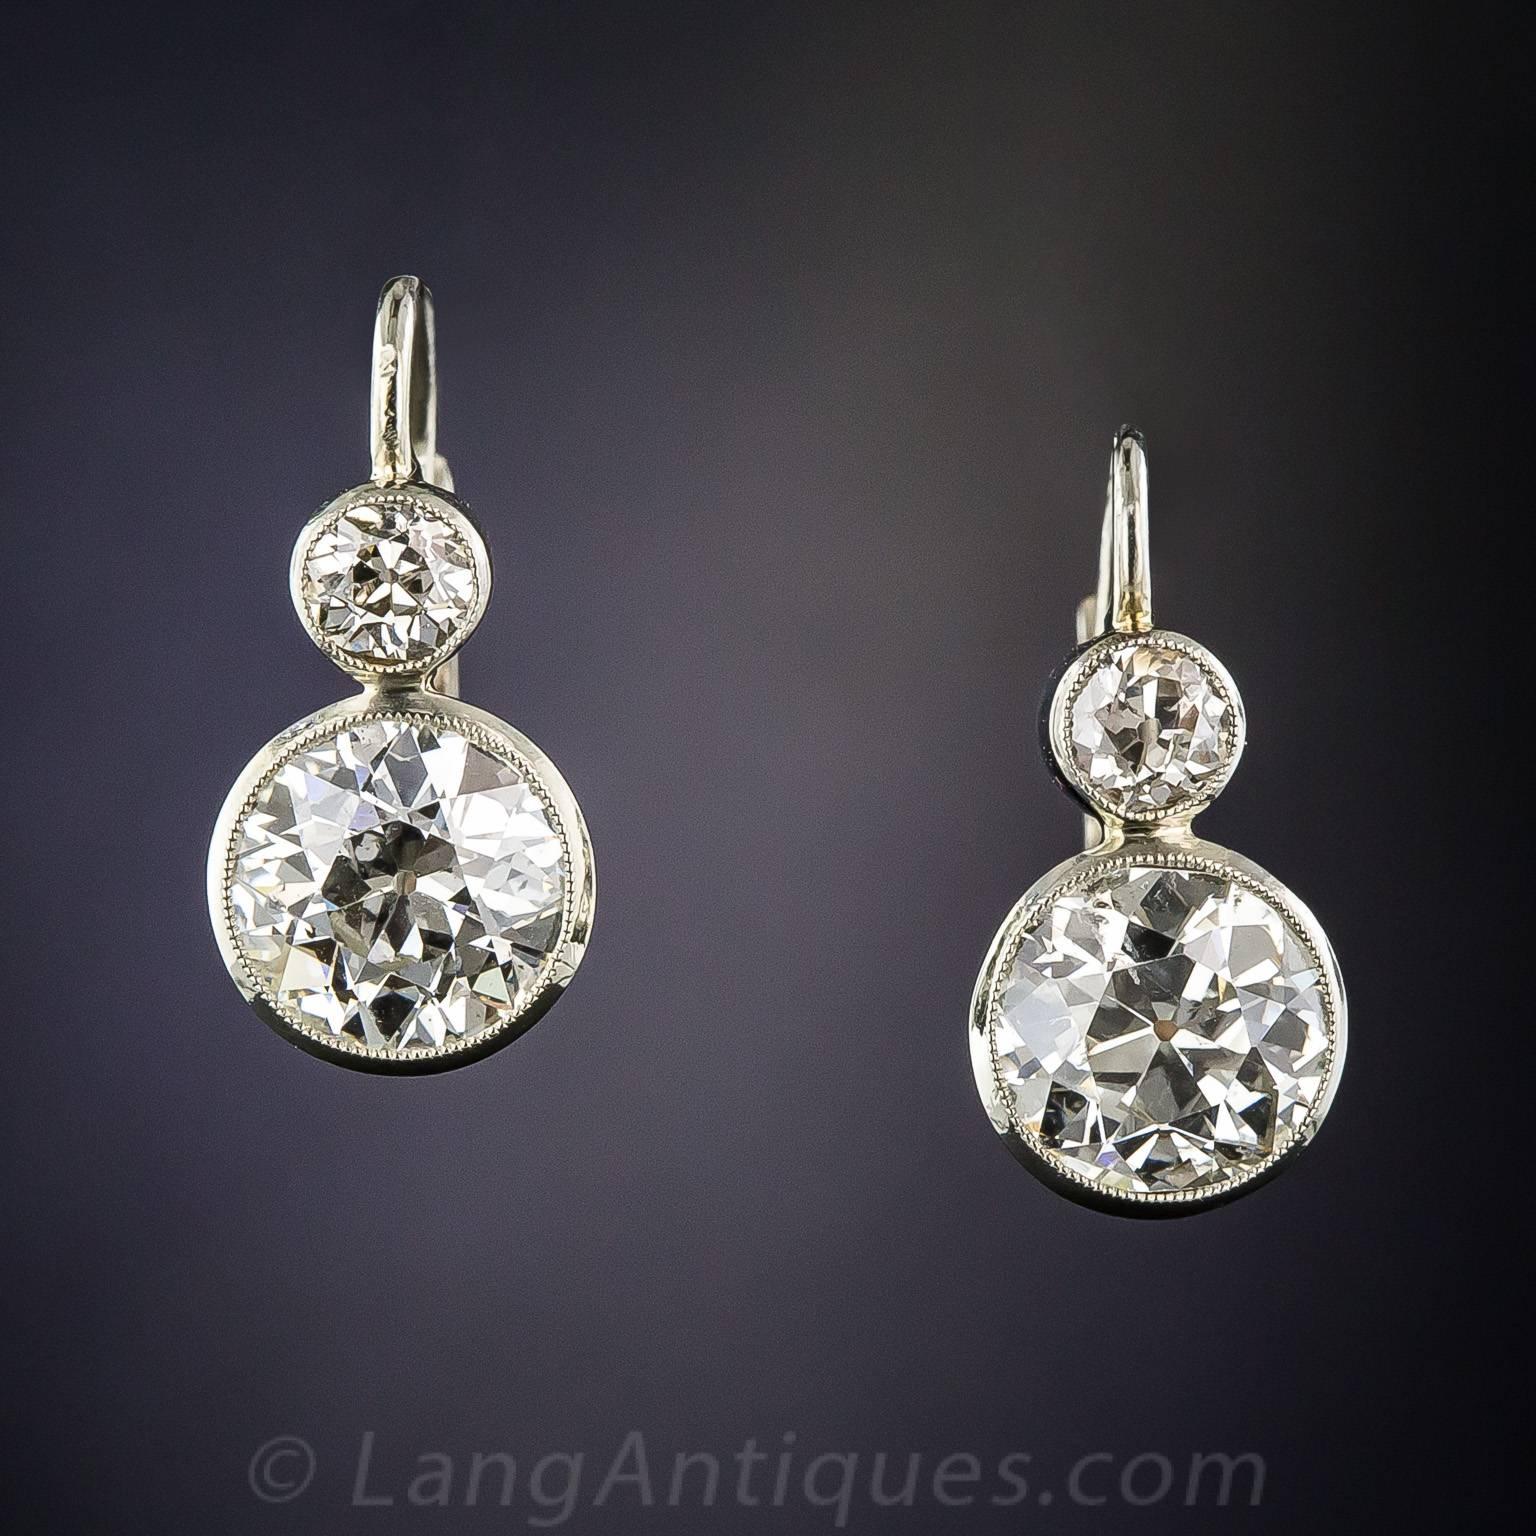 From 1920s Vienna come these bright and beautiful earrings featuring a dazzling pair of bright white European-cut diamonds, together weighing 3.20 carats. The diamonds are presented in delicately milgrained collet settings of 14K white gold which